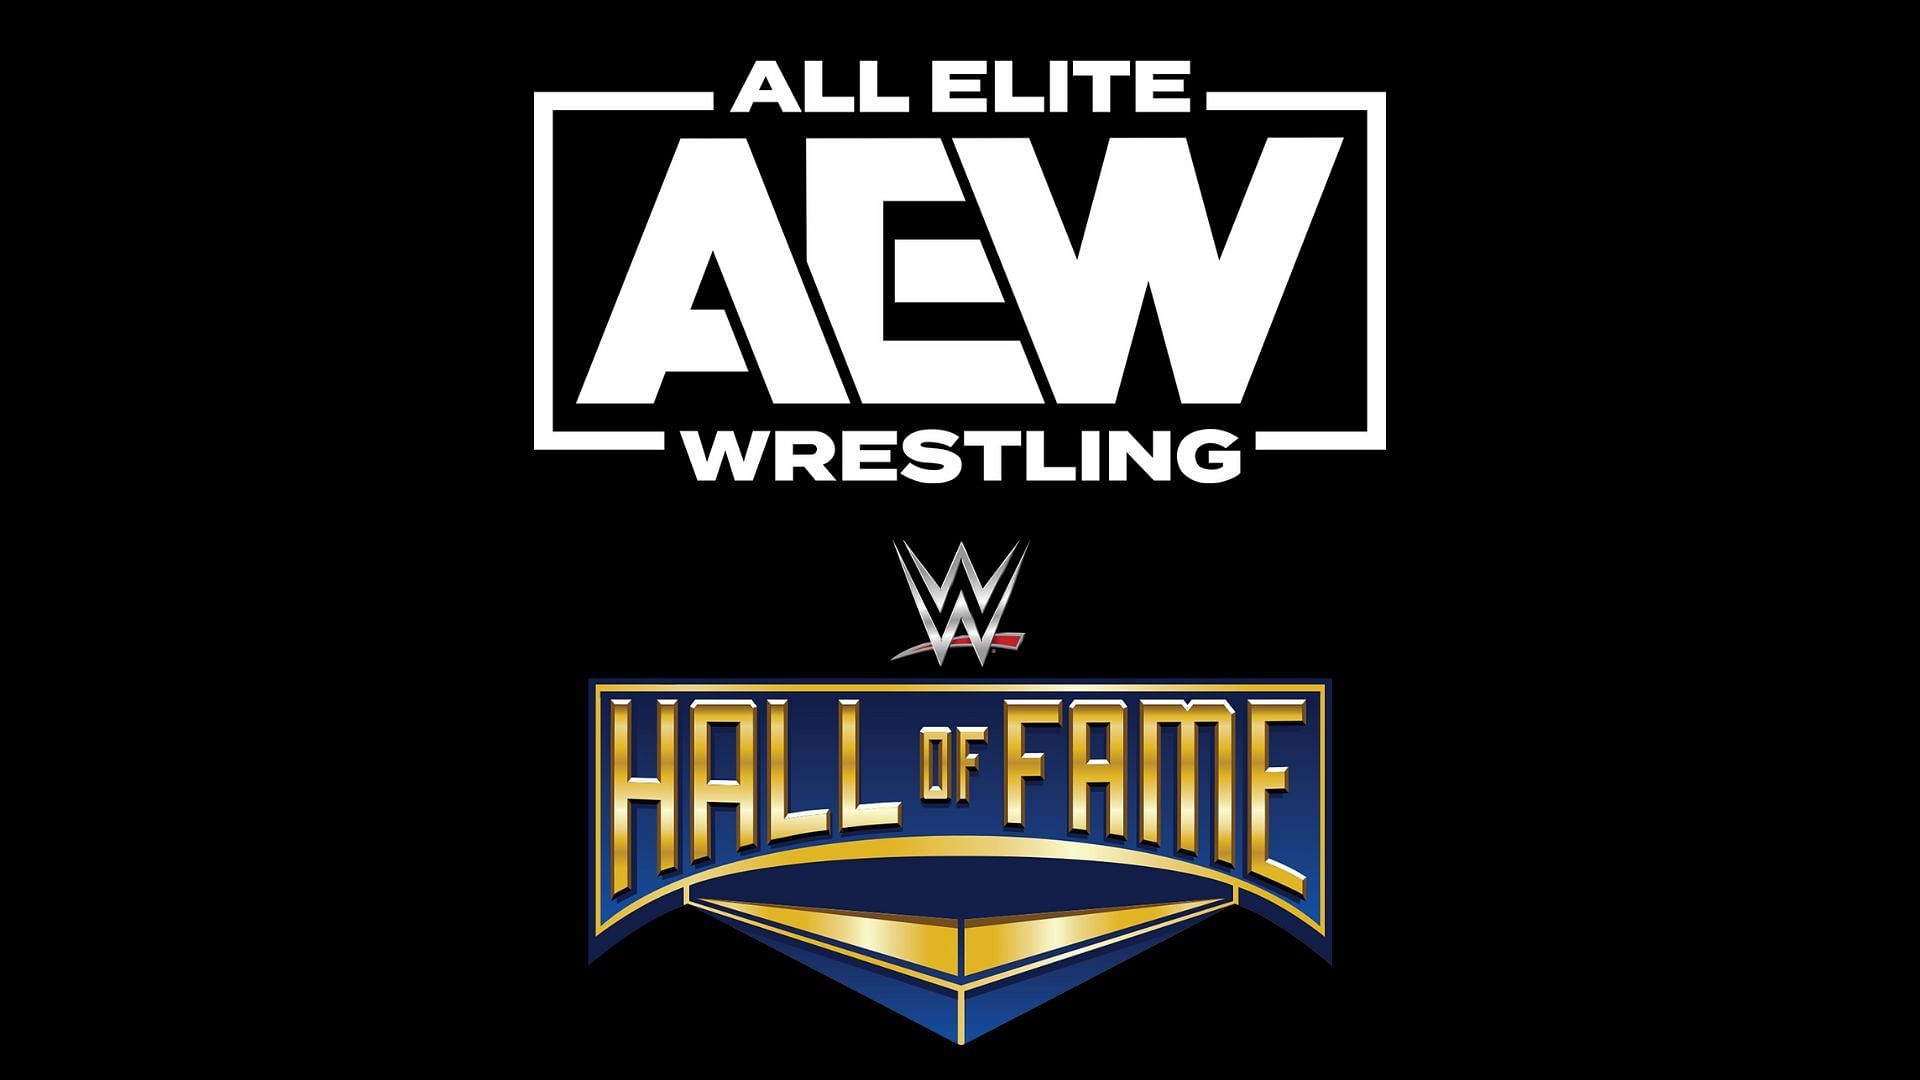 Will this WWE Hall of Famer turn the tide in AEW?